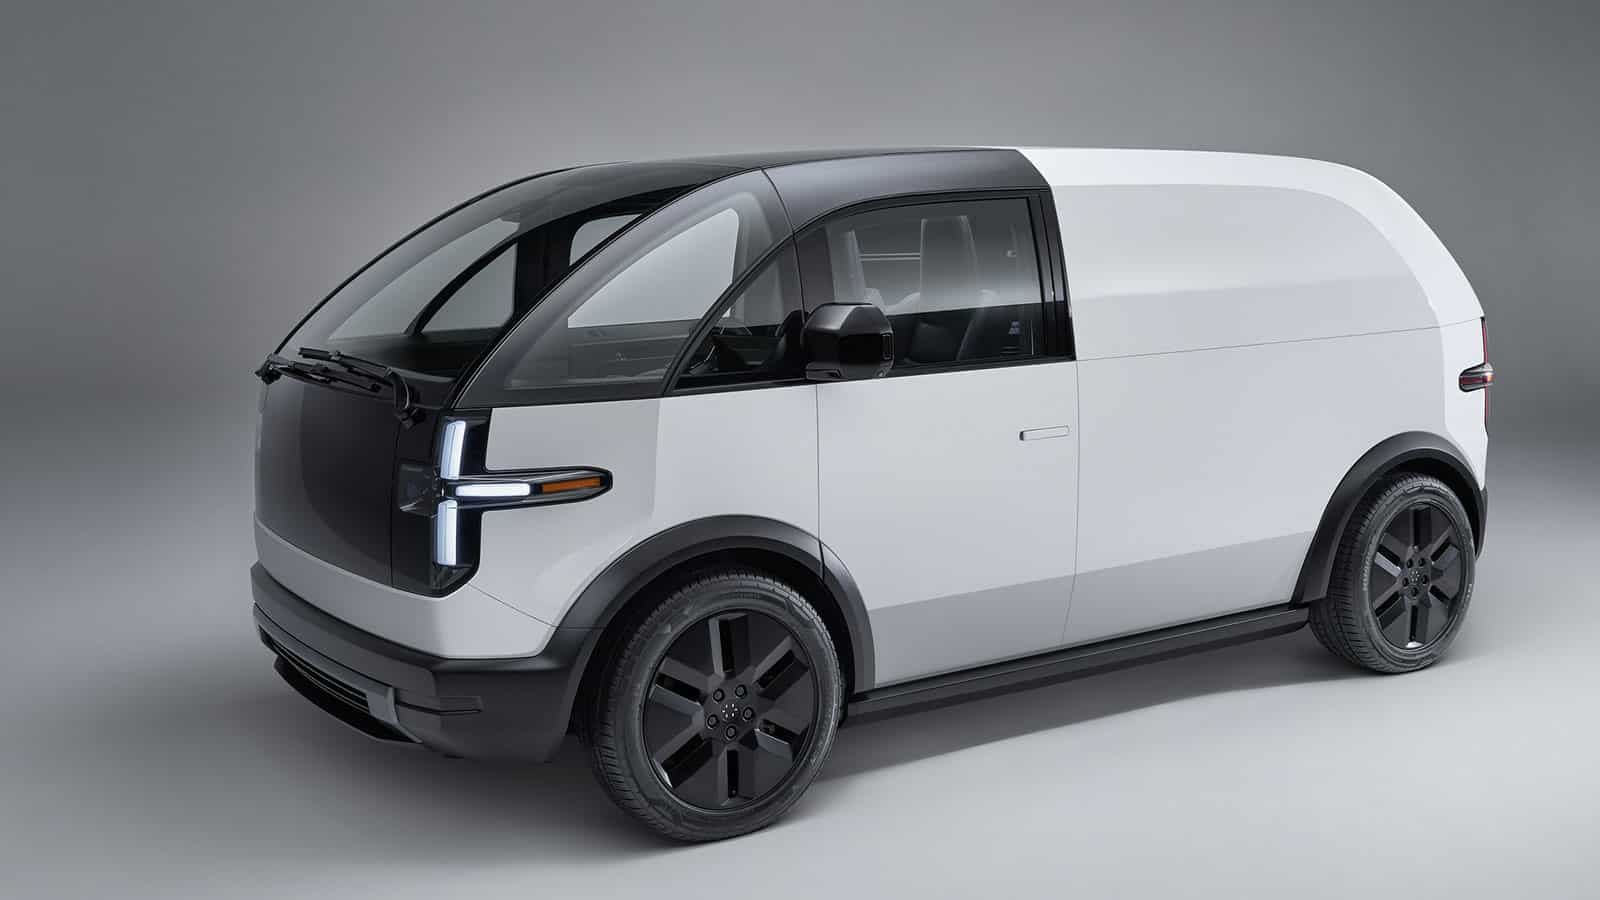 Canoo LDV side front view, model to be used by oklahoma state gov't